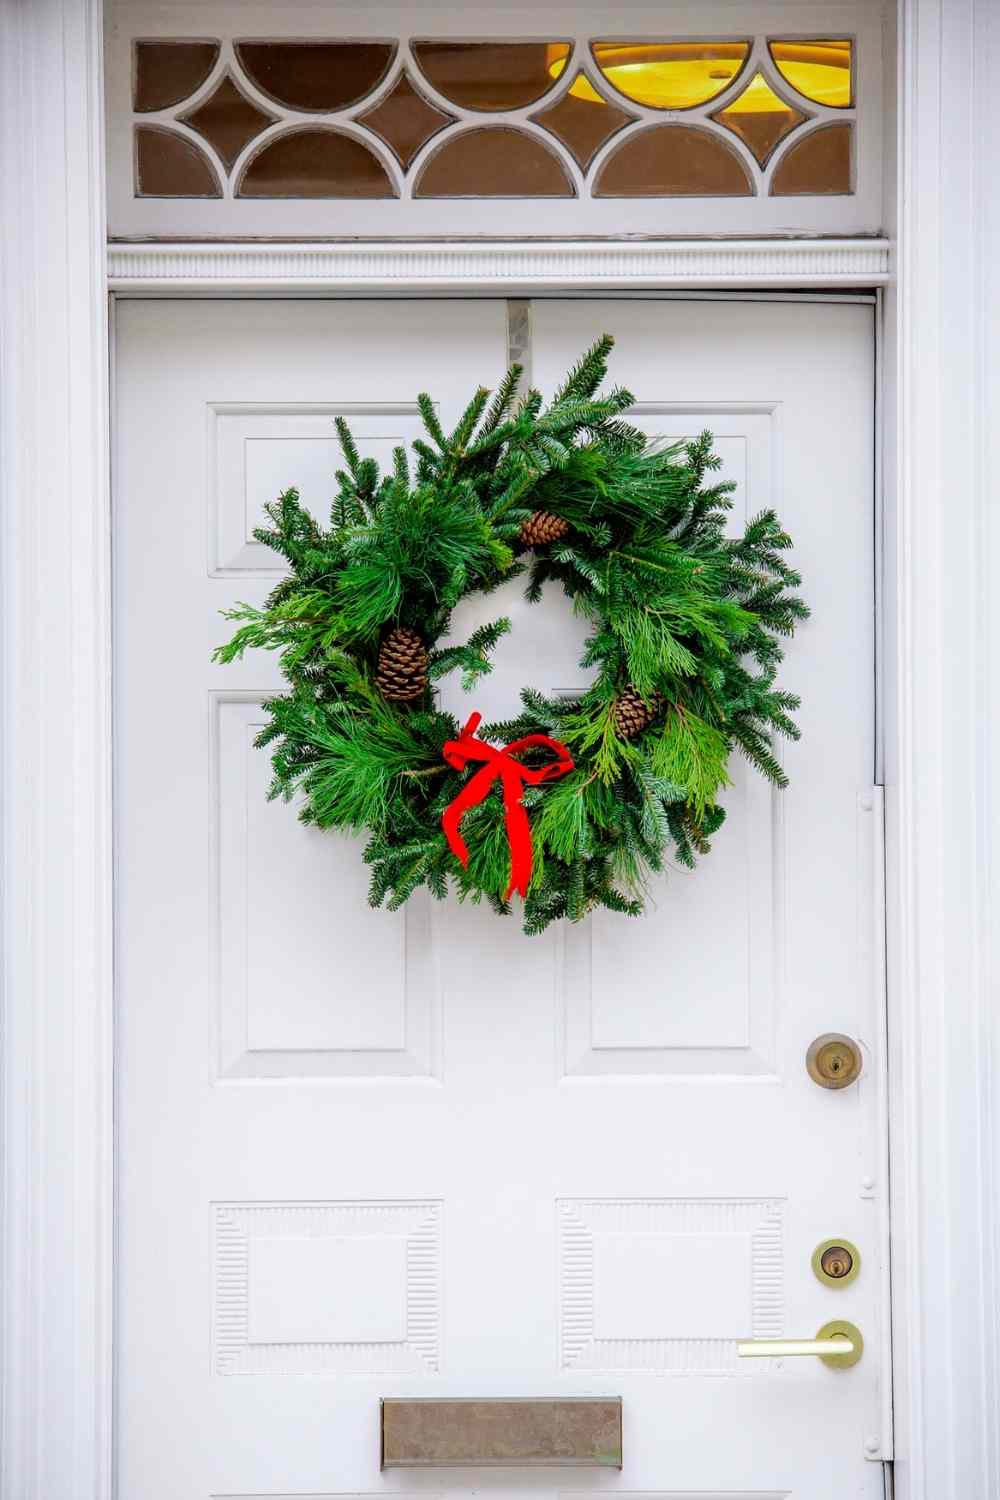 Ornate wreaths for the doors